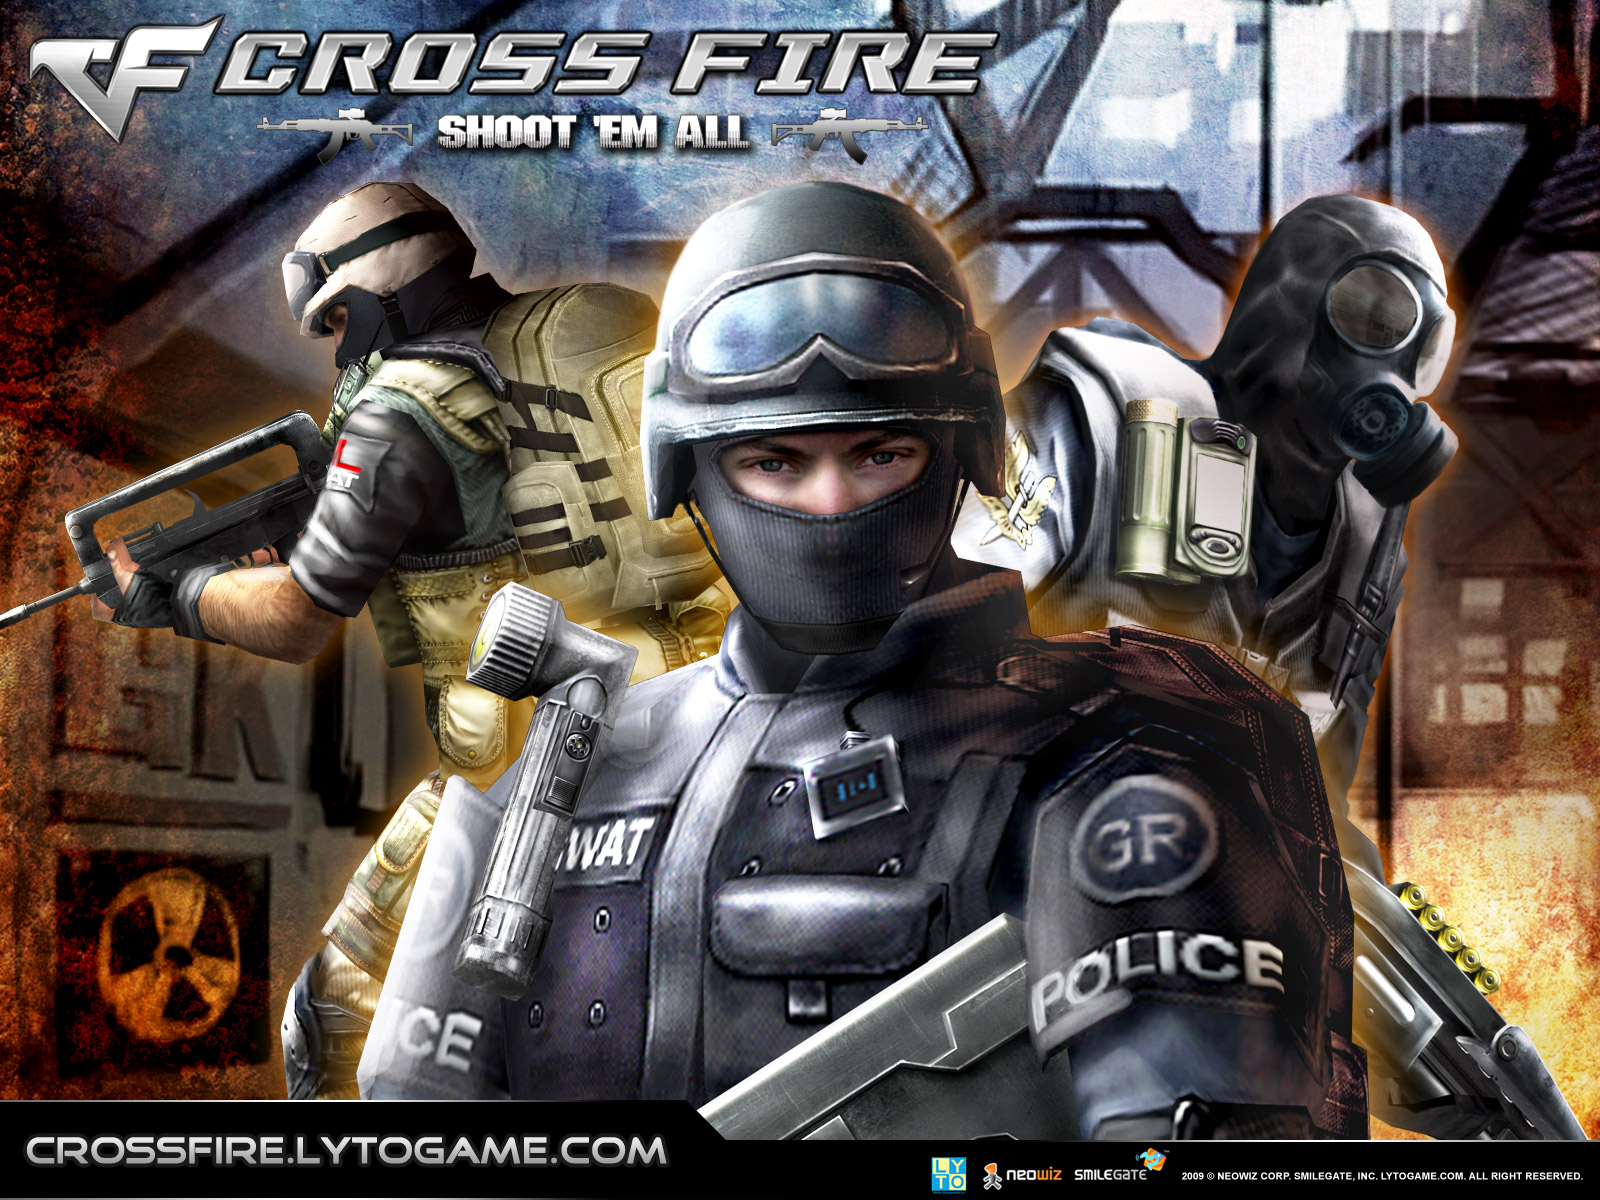 cf wallpaper,action adventure game,pc game,shooter game,games,strategy video game